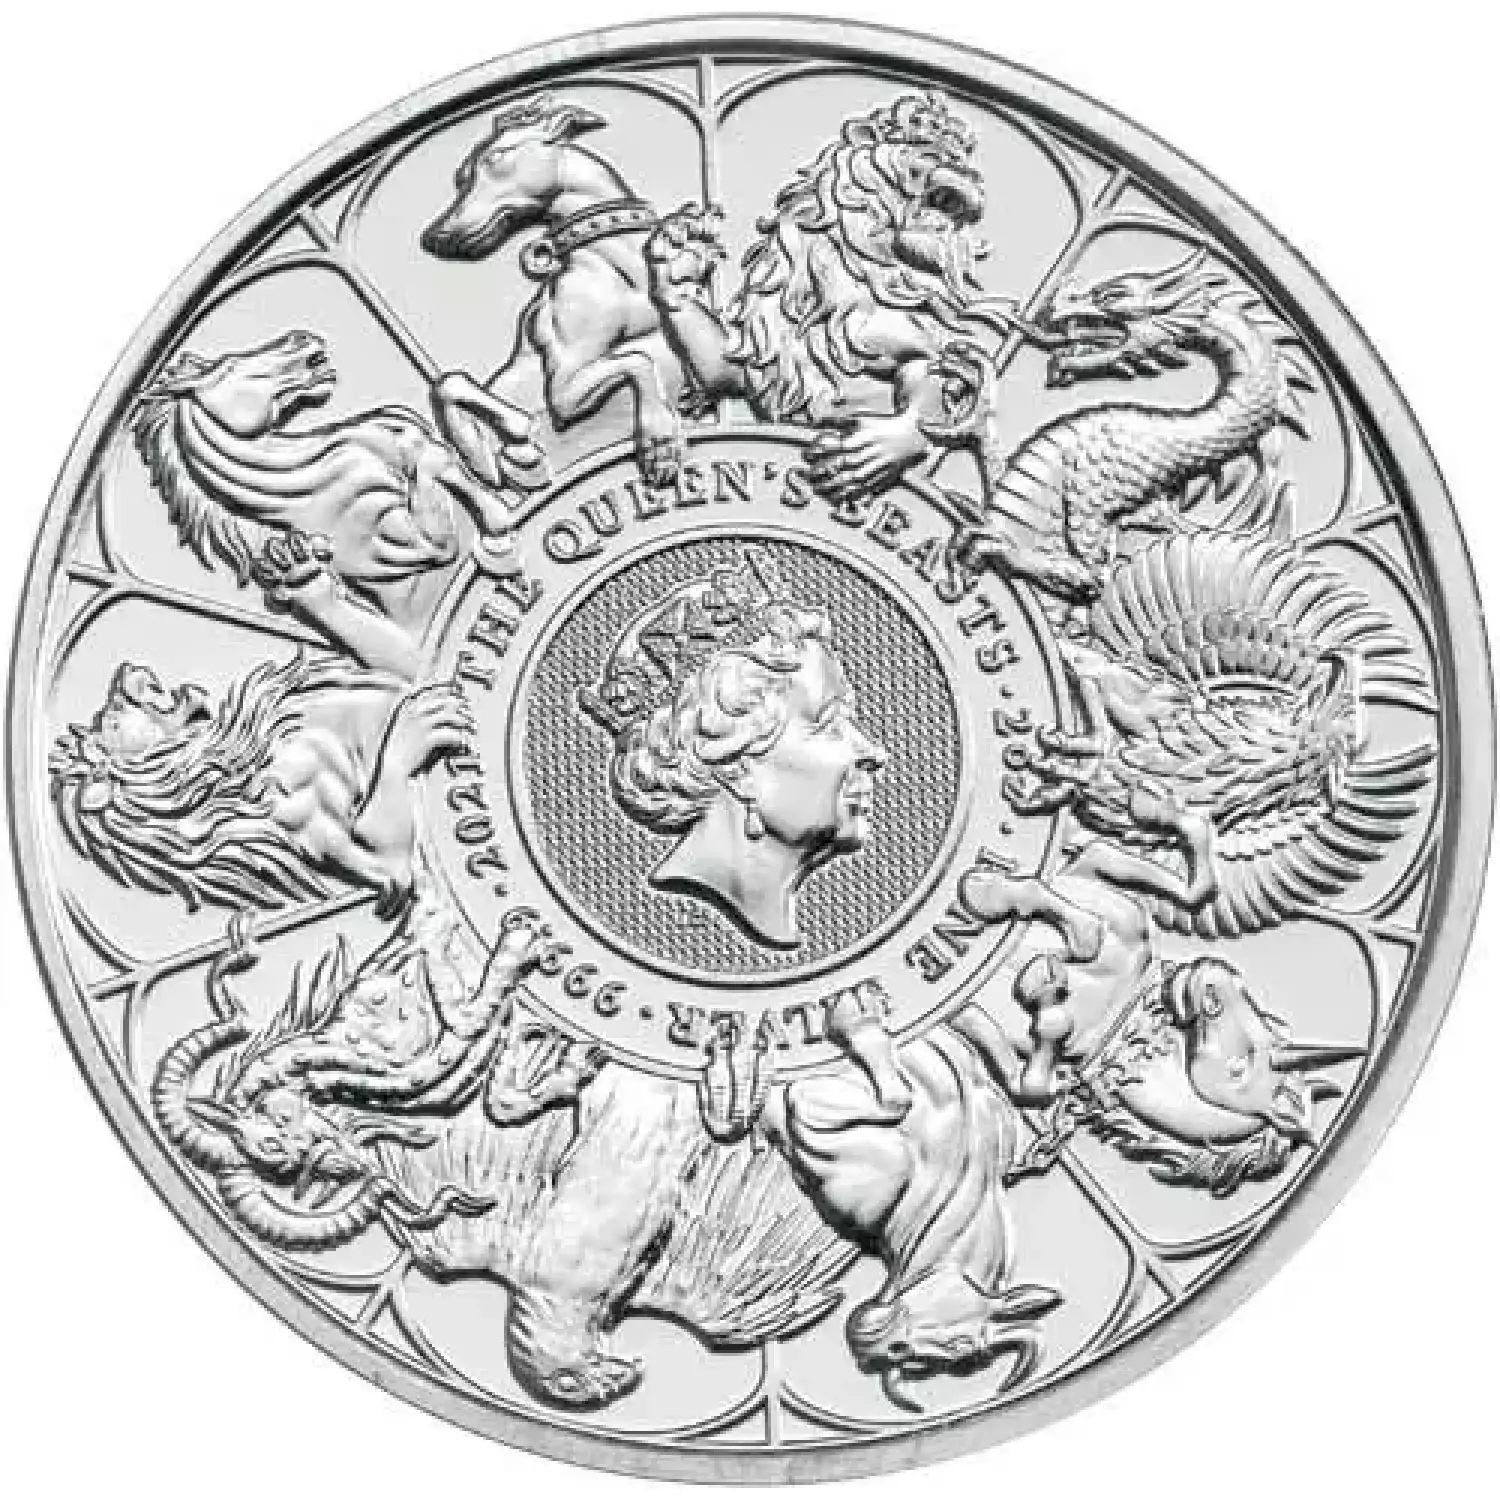 2021 2 oz British Silver Queen’s Beast Collection Coin (BU)